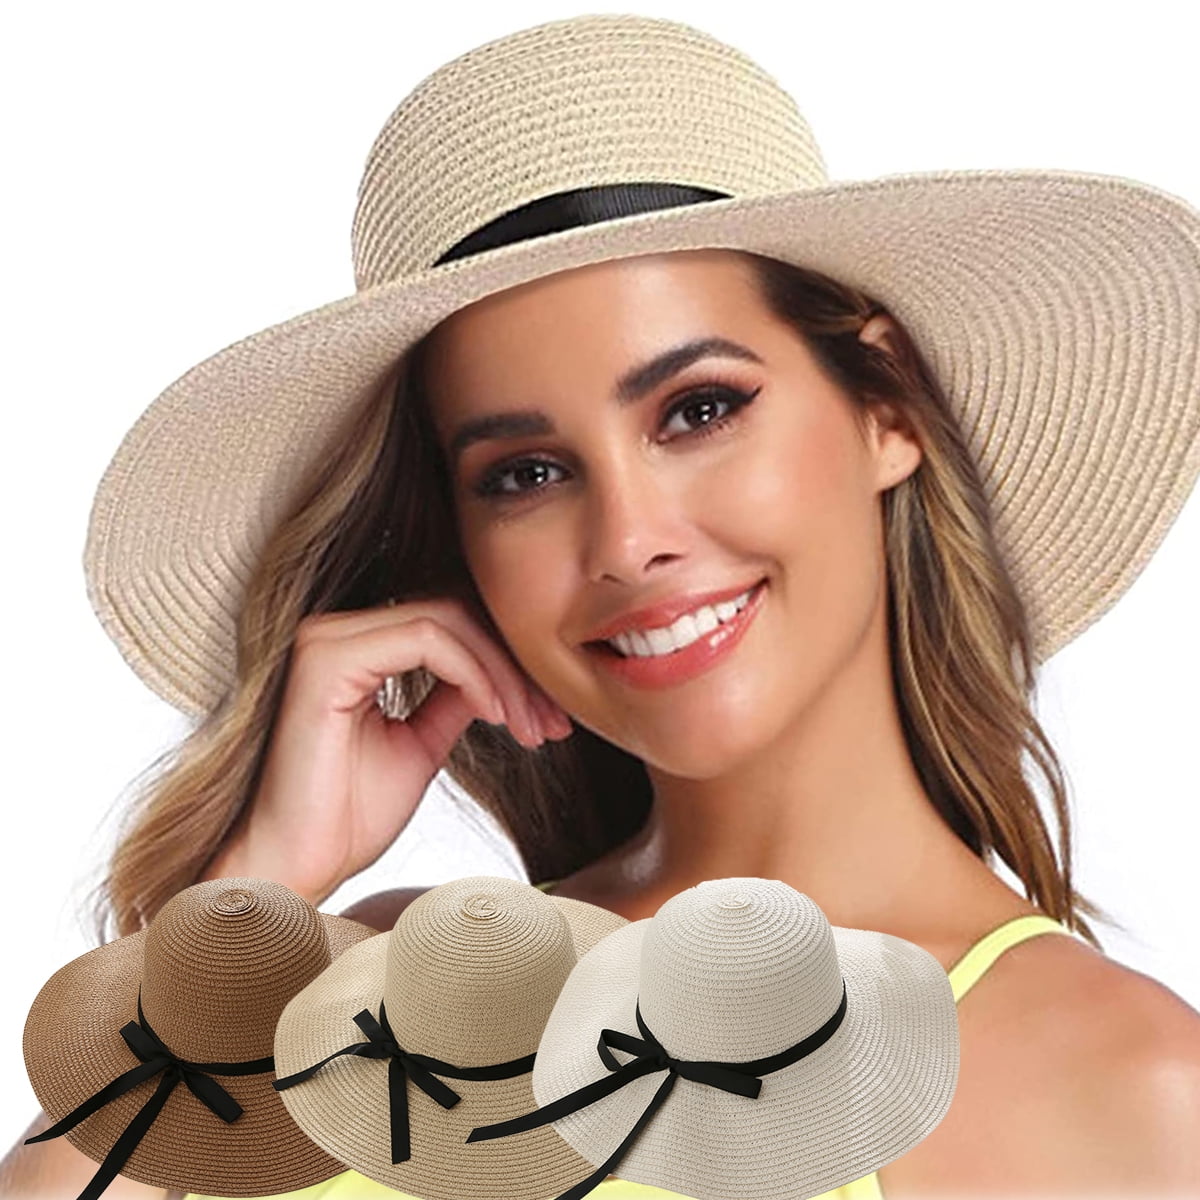 AURORA TRADE Womens Sun Straw Beach Hat, Wide Brim Floppy Beach Hat  Foldable Roll up Summer Hats with UV UPF 50+ Protection